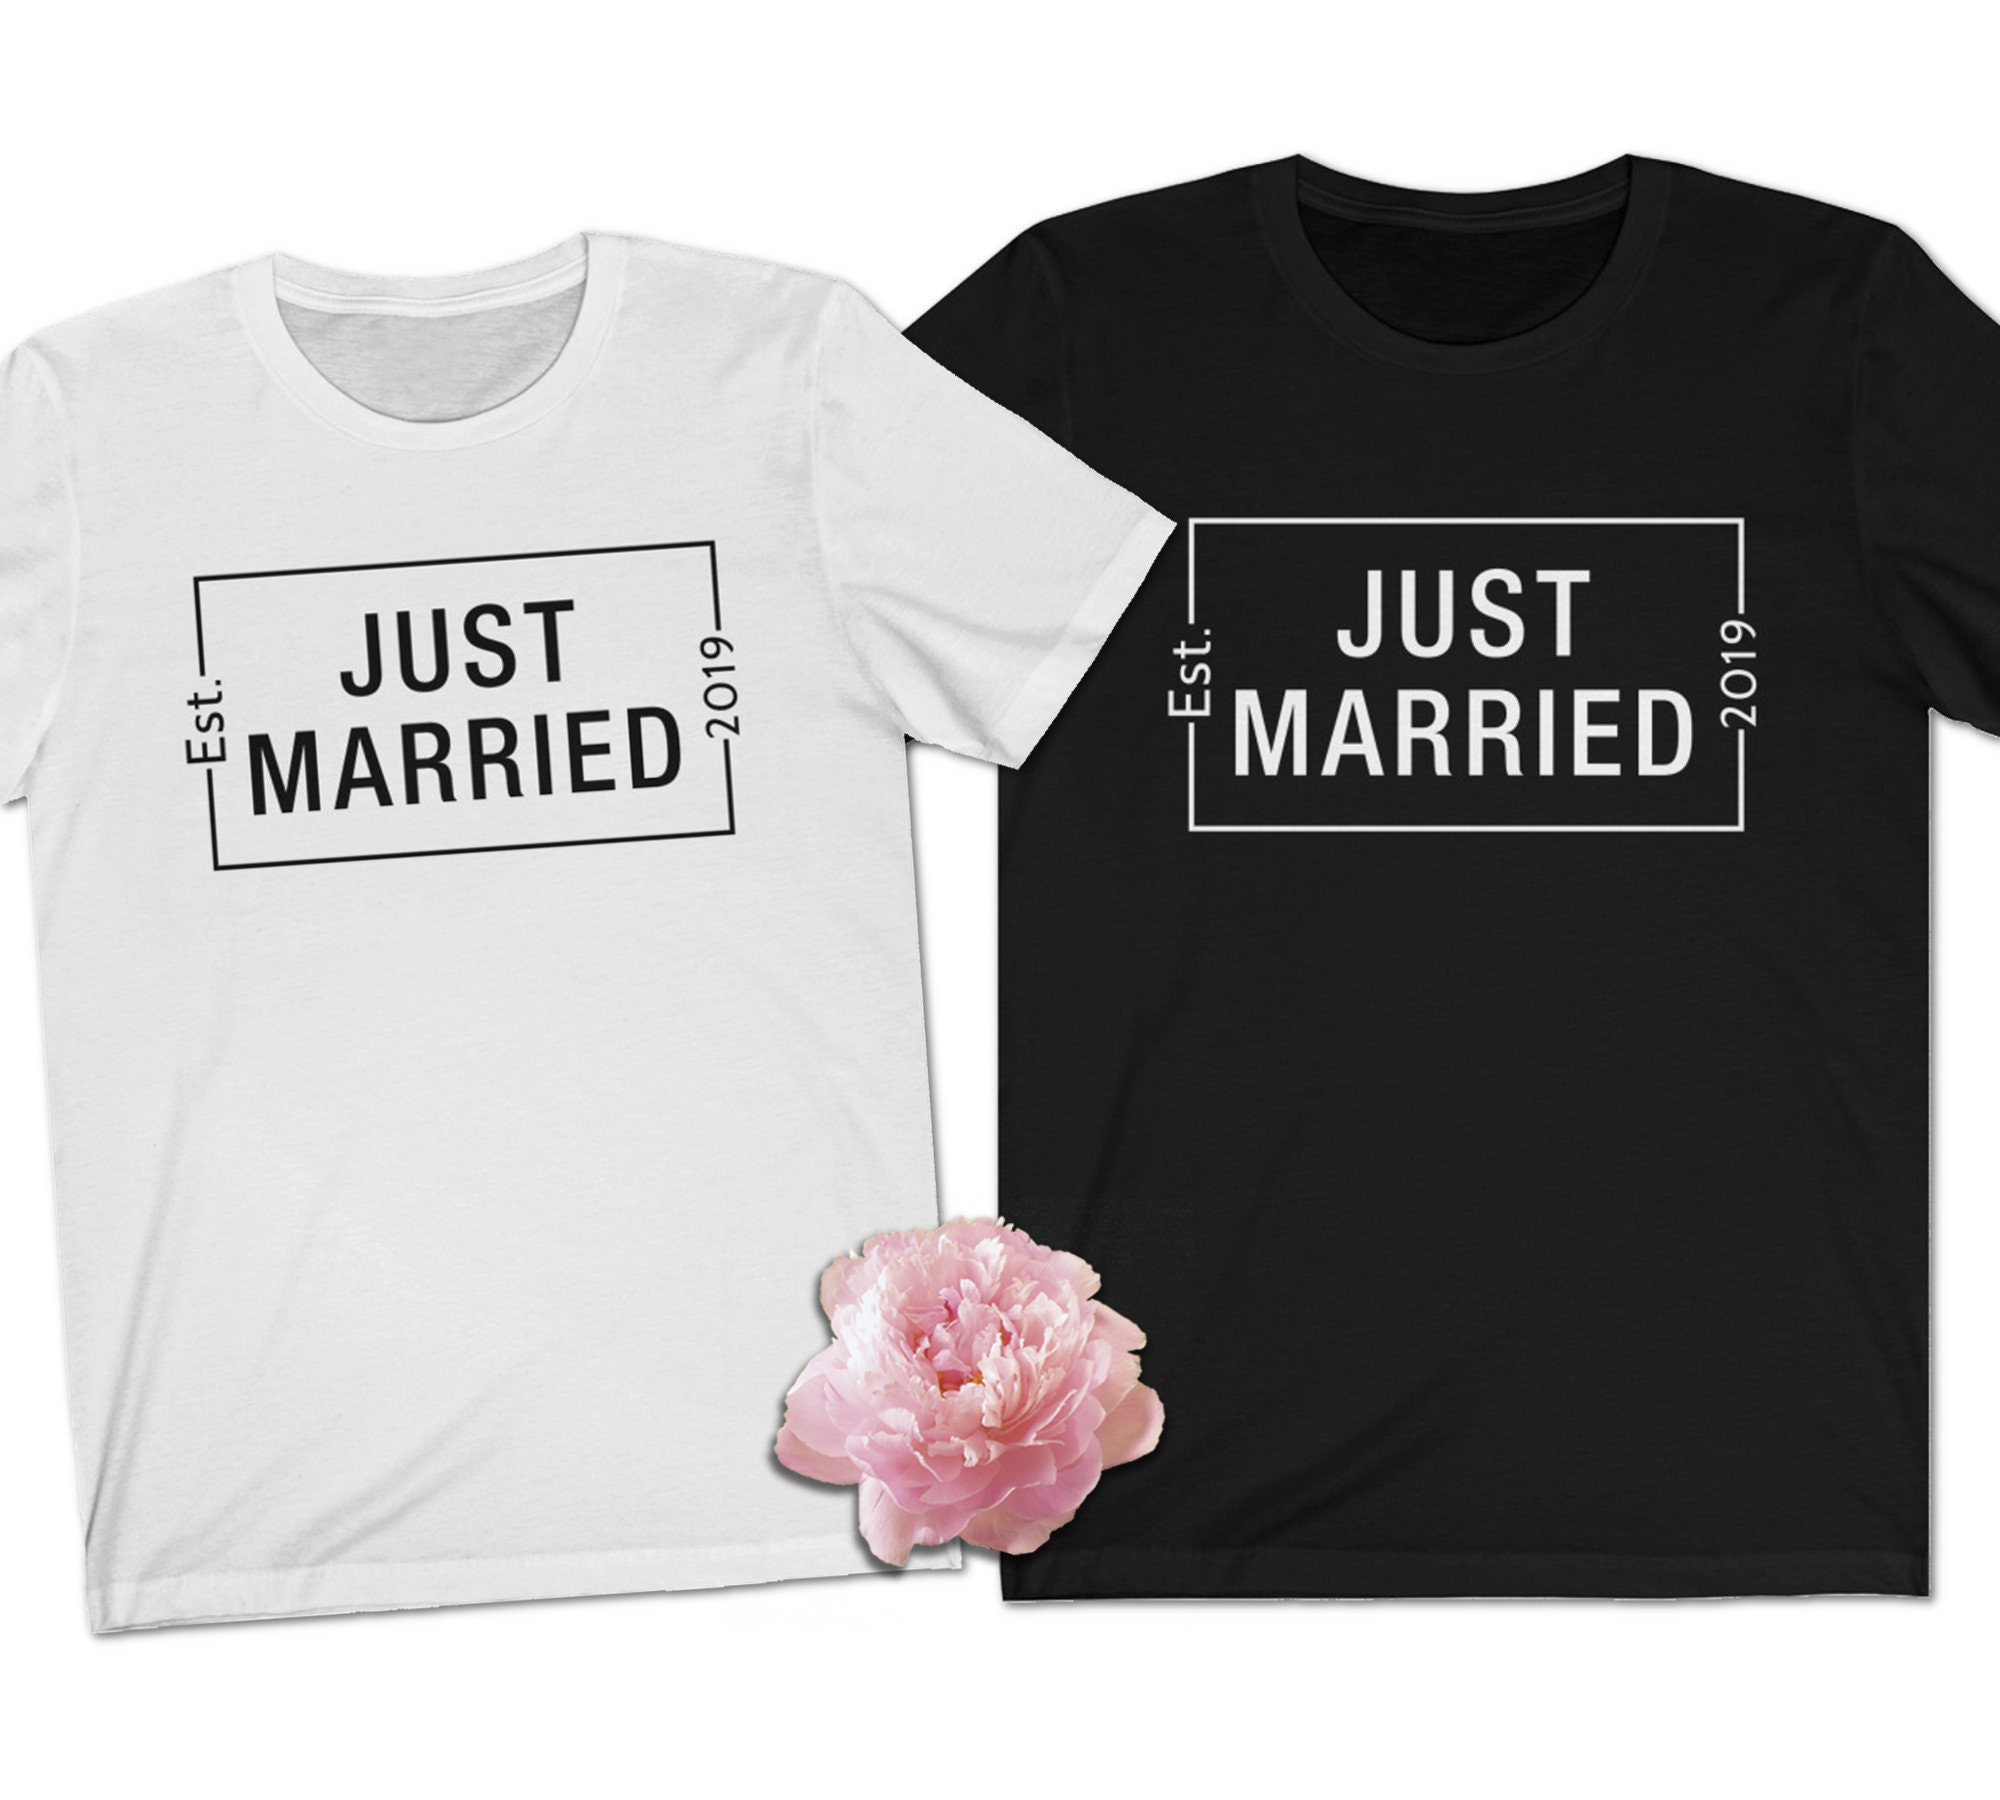 Just Married Shirts Personalized relaxed fit shirts Just | Etsy